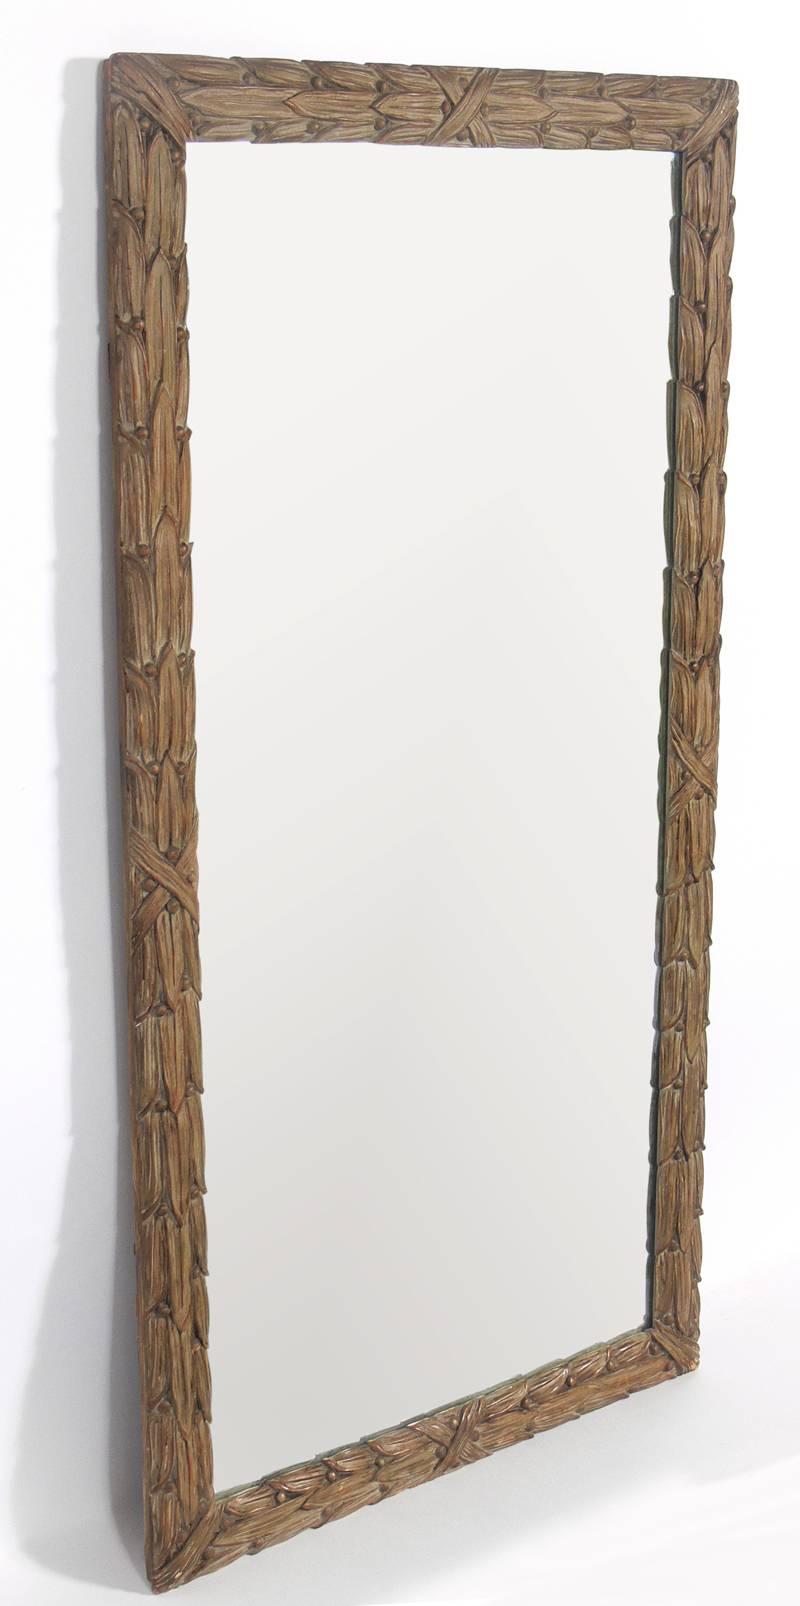 Neoclassical Carved Leaves Mirror, circa 1940s. Wonderful carved wood and gesso mirror. Retains warm original patina to both original mirror and frame.